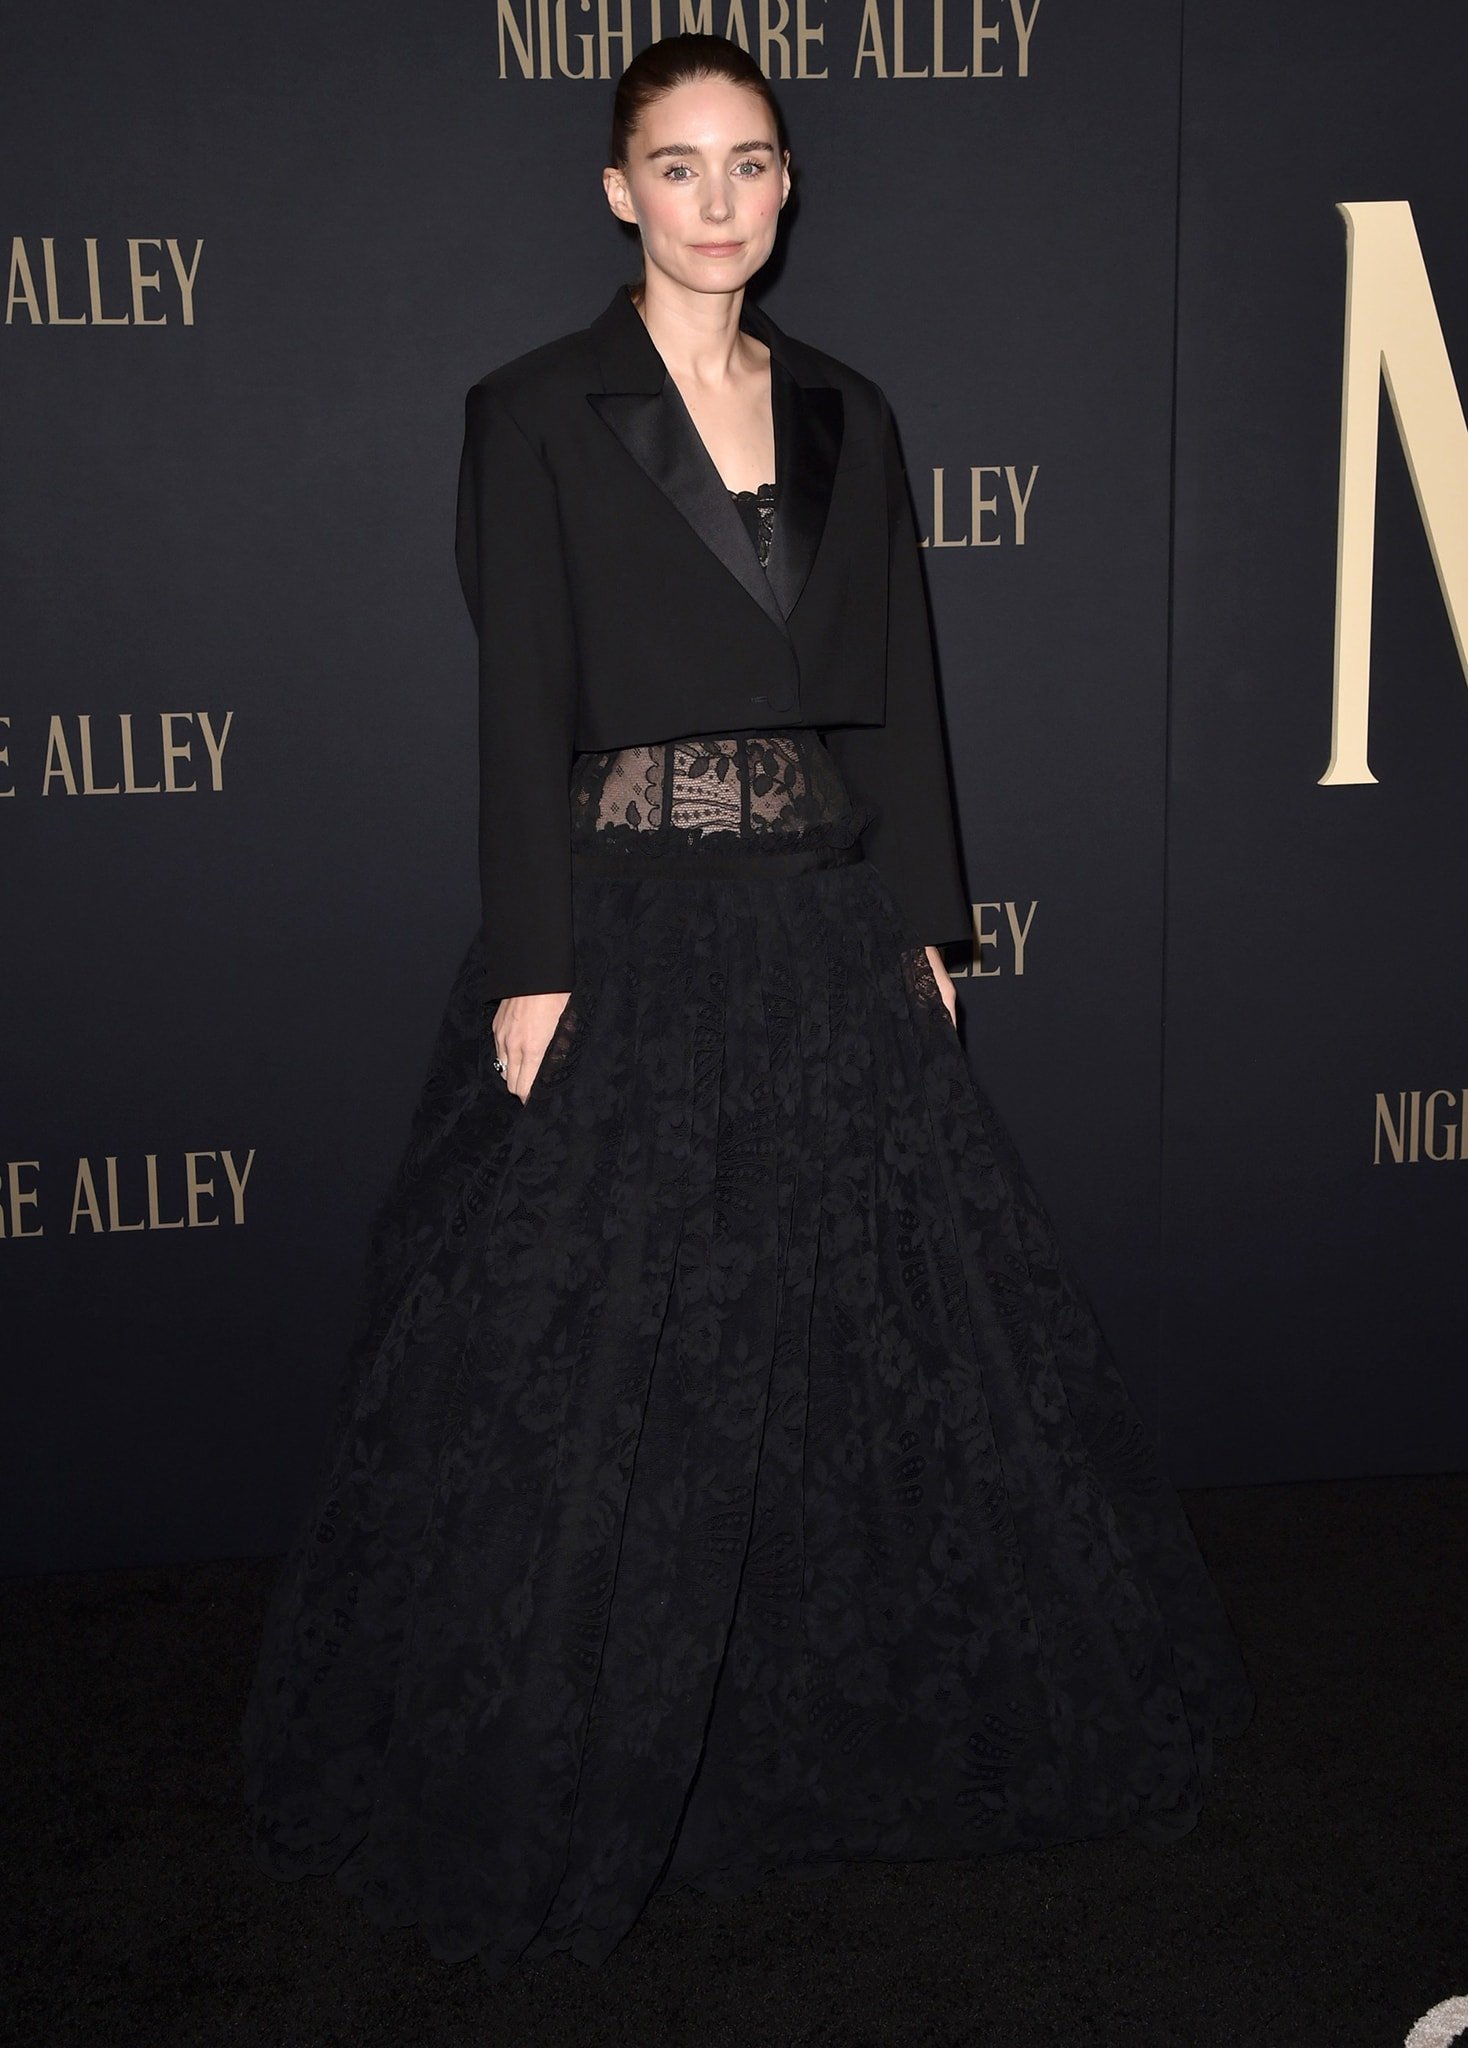 Rooney Mara in a custom Alexander McQueen black lace gown at the Nightmare Alley world premiere held at Alice Tully Hall in New York City on December 1, 2021